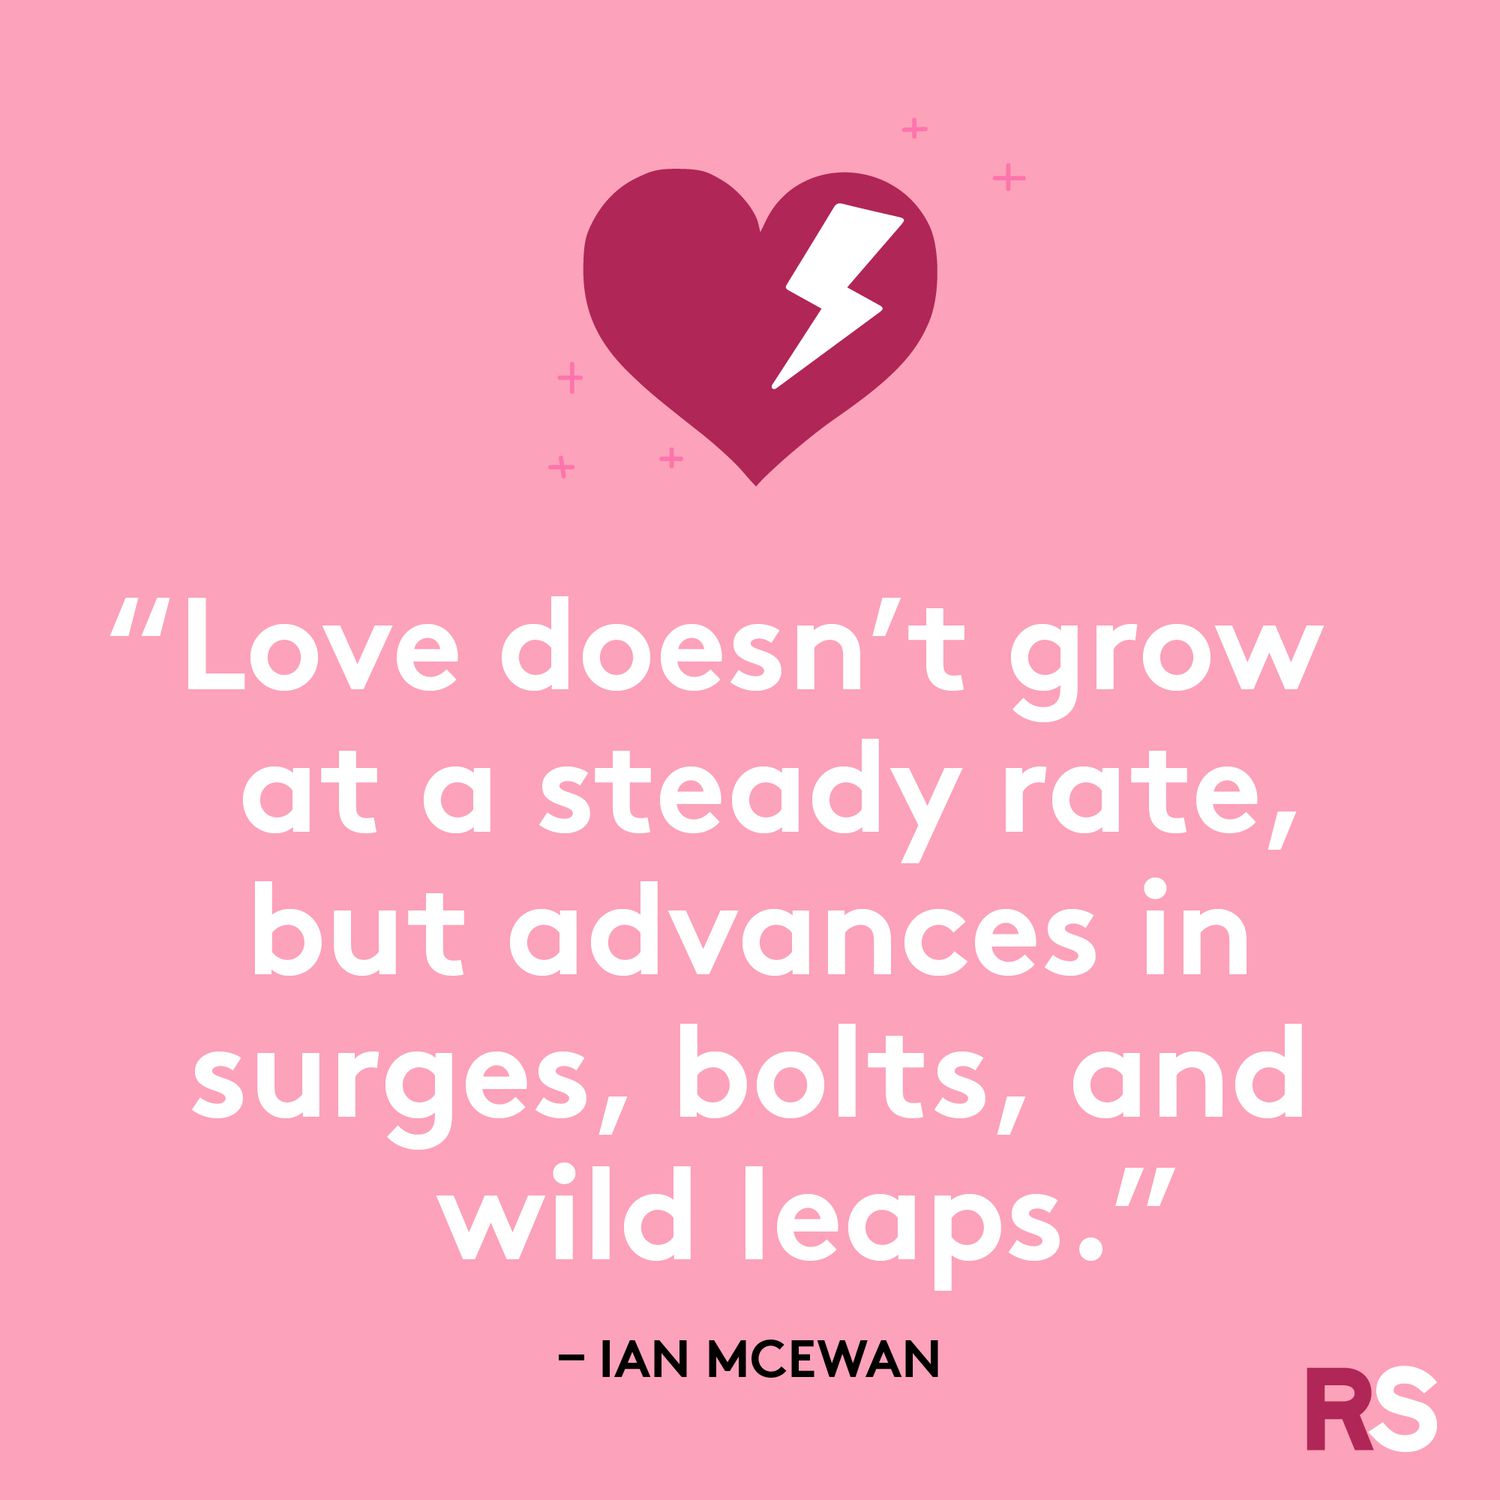 Love doesn't grow at a steady rate, but advances in surges, bolts, and wild leaps.